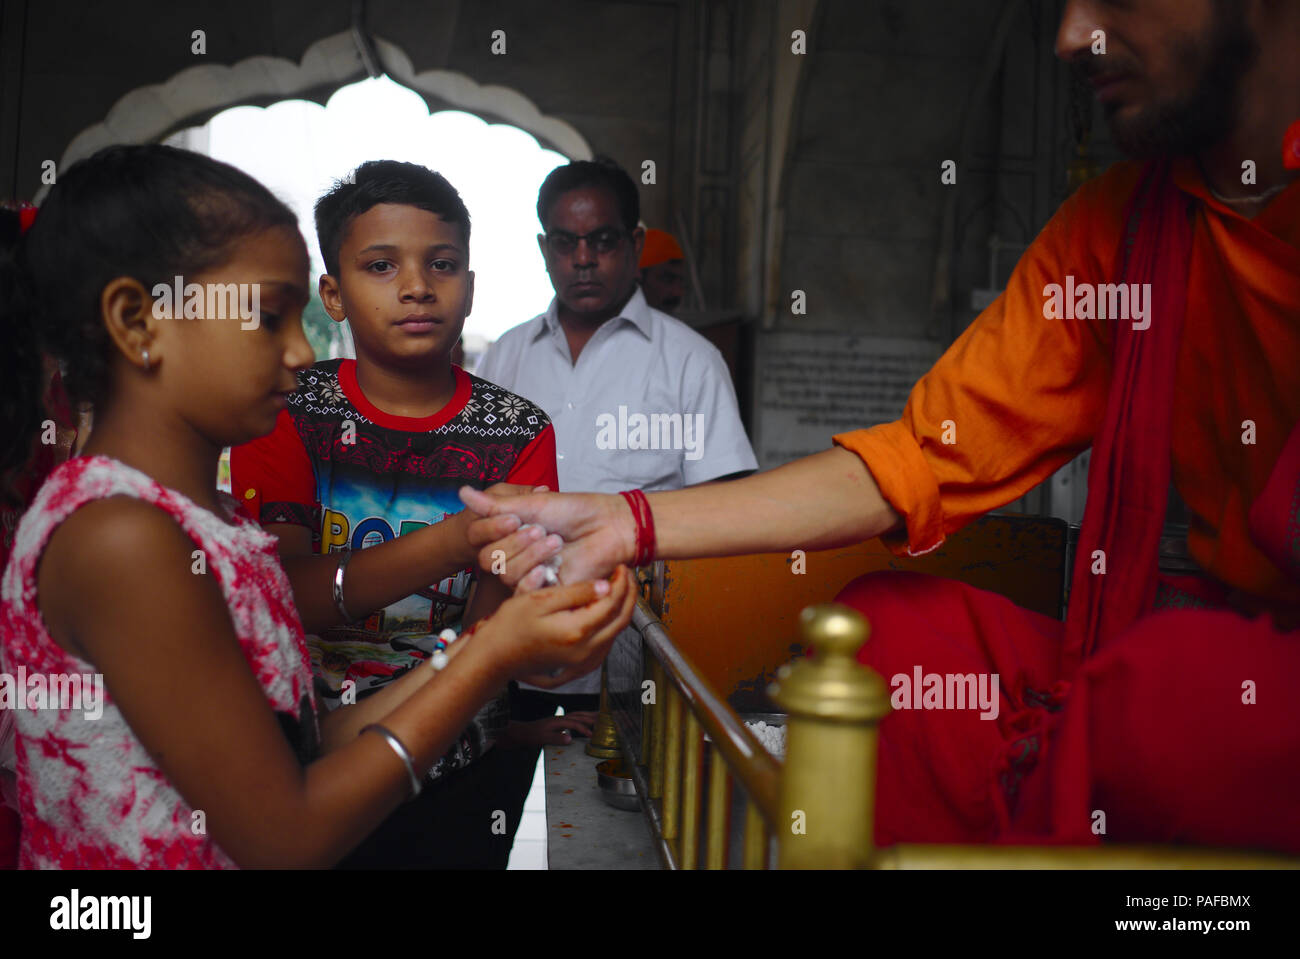 Girl receiving small sweets as blessing at Sitla Mandir temple in Amritsar. Stock Photo